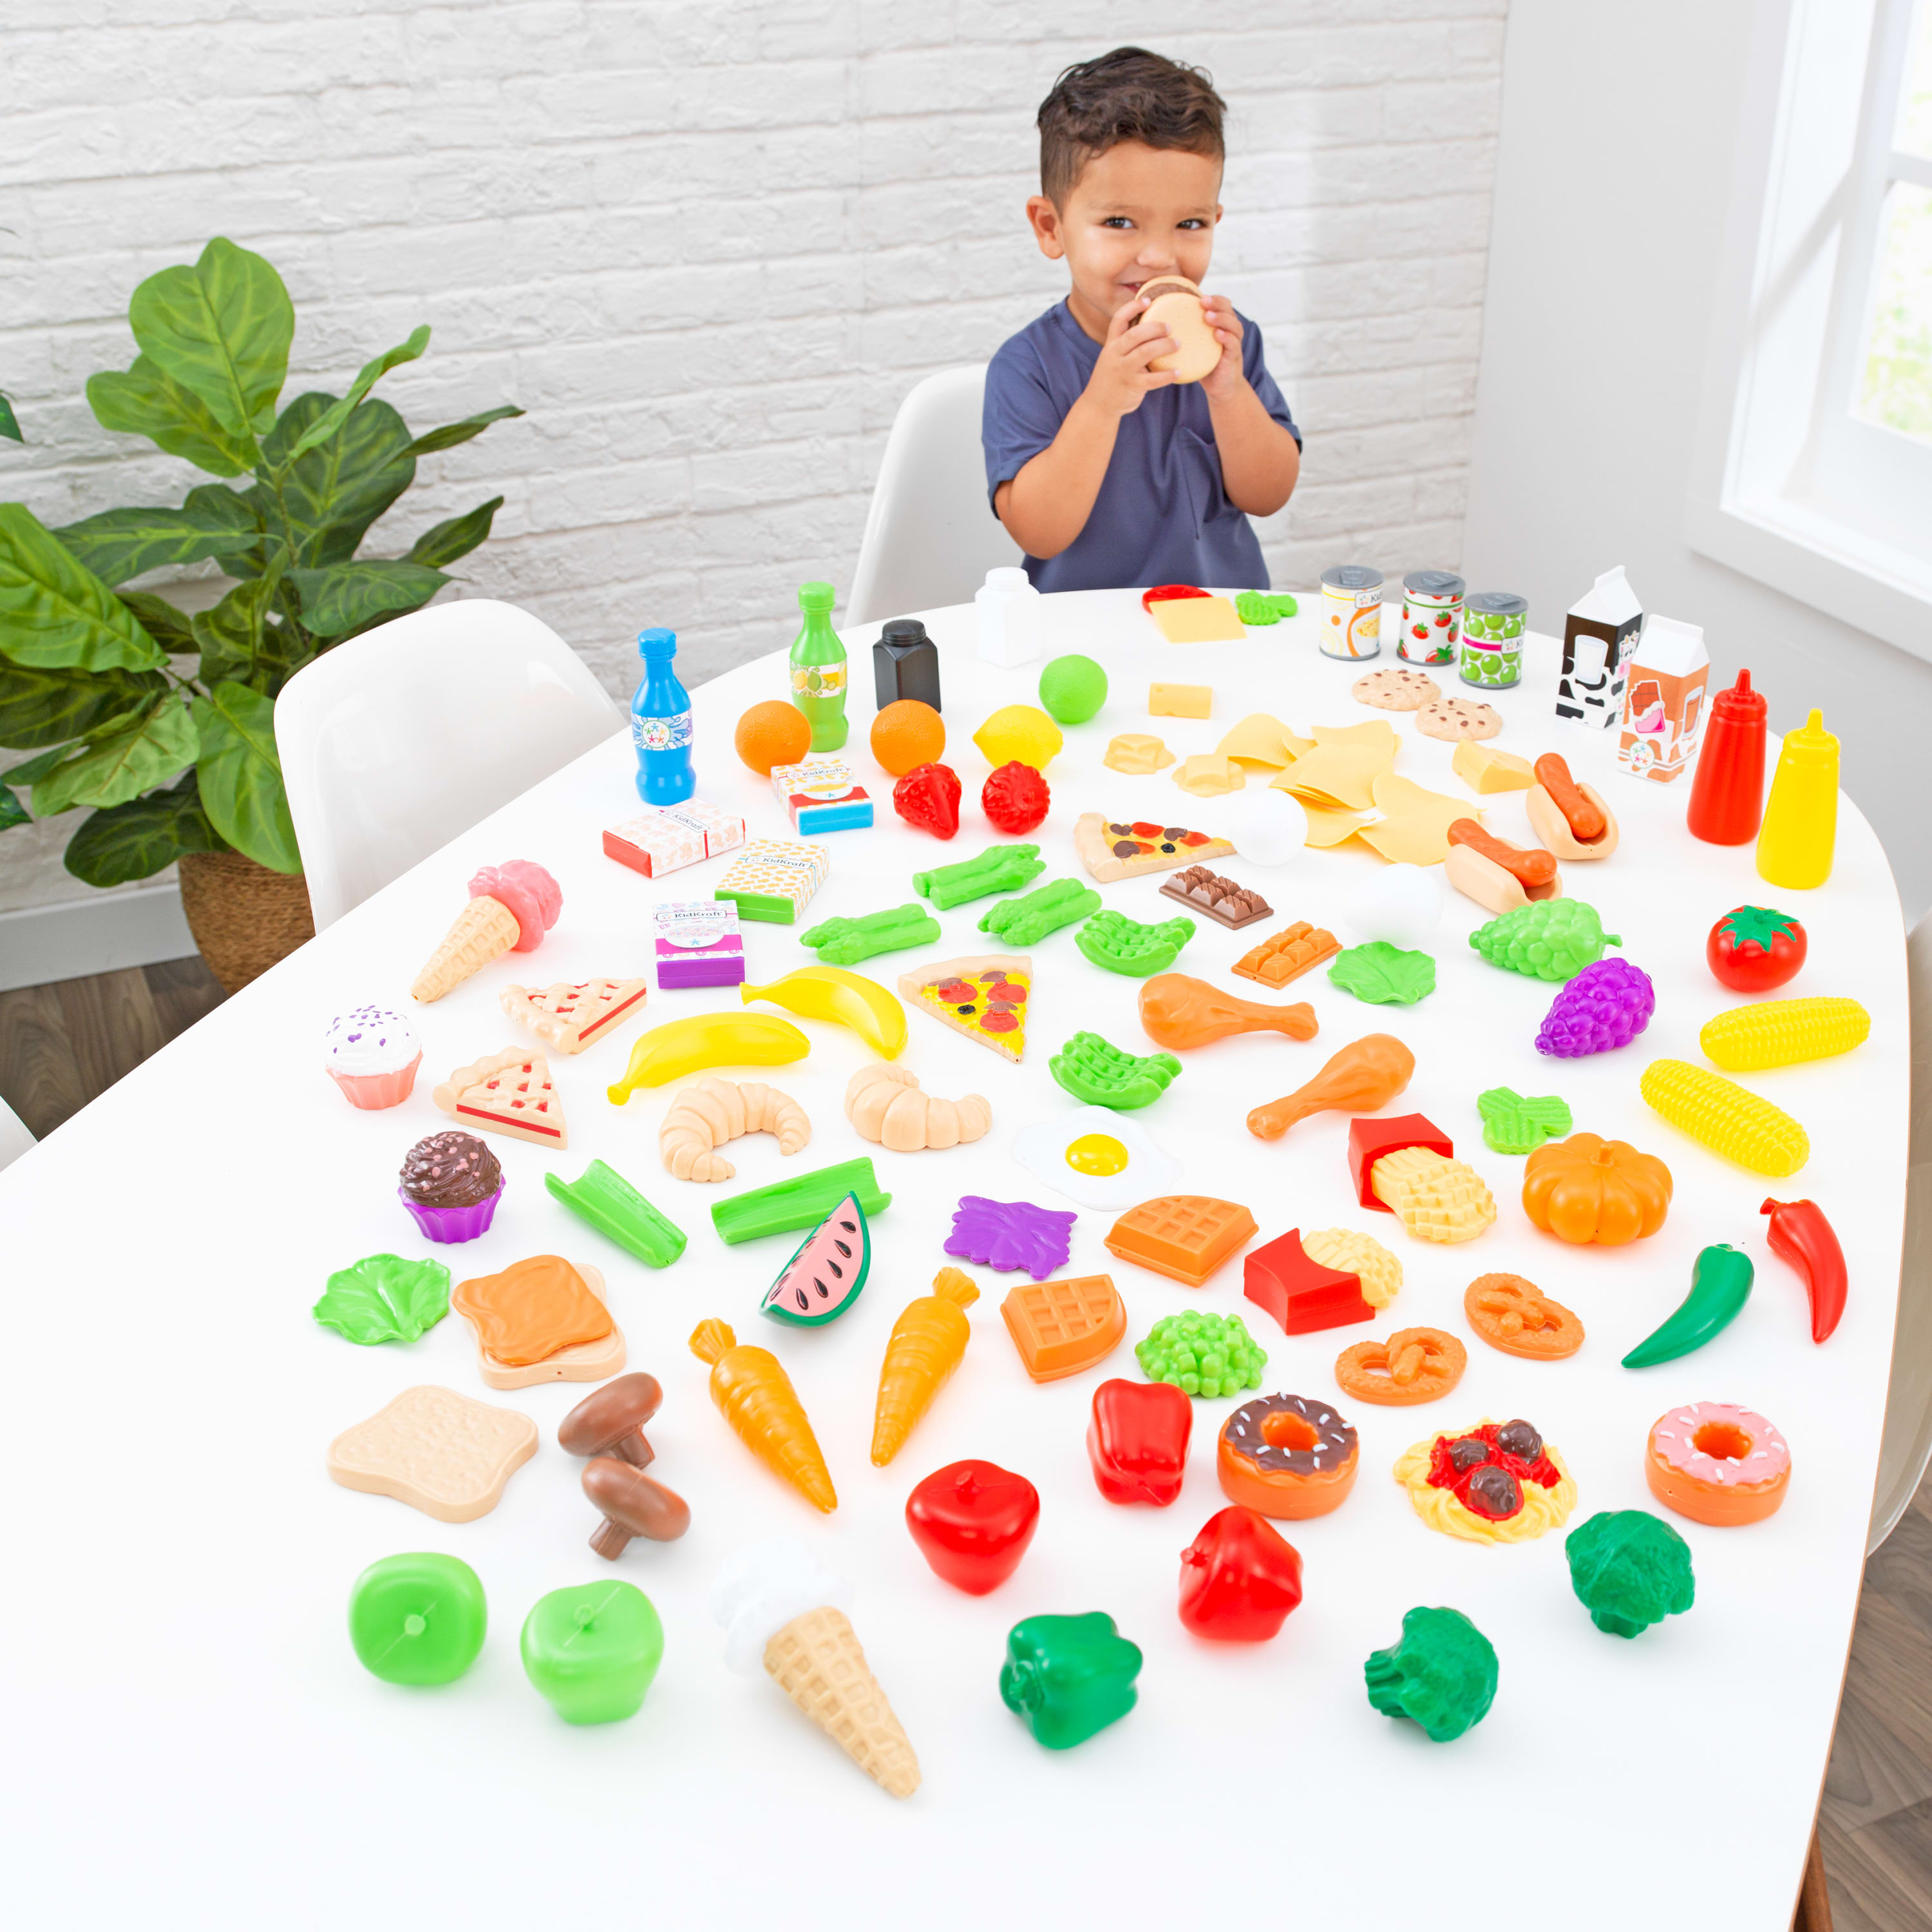 KidKraft 115-Piece Deluxe Tasty Treats Play Food Set, Plastic Grocery and Pantry Items - image 2 of 6